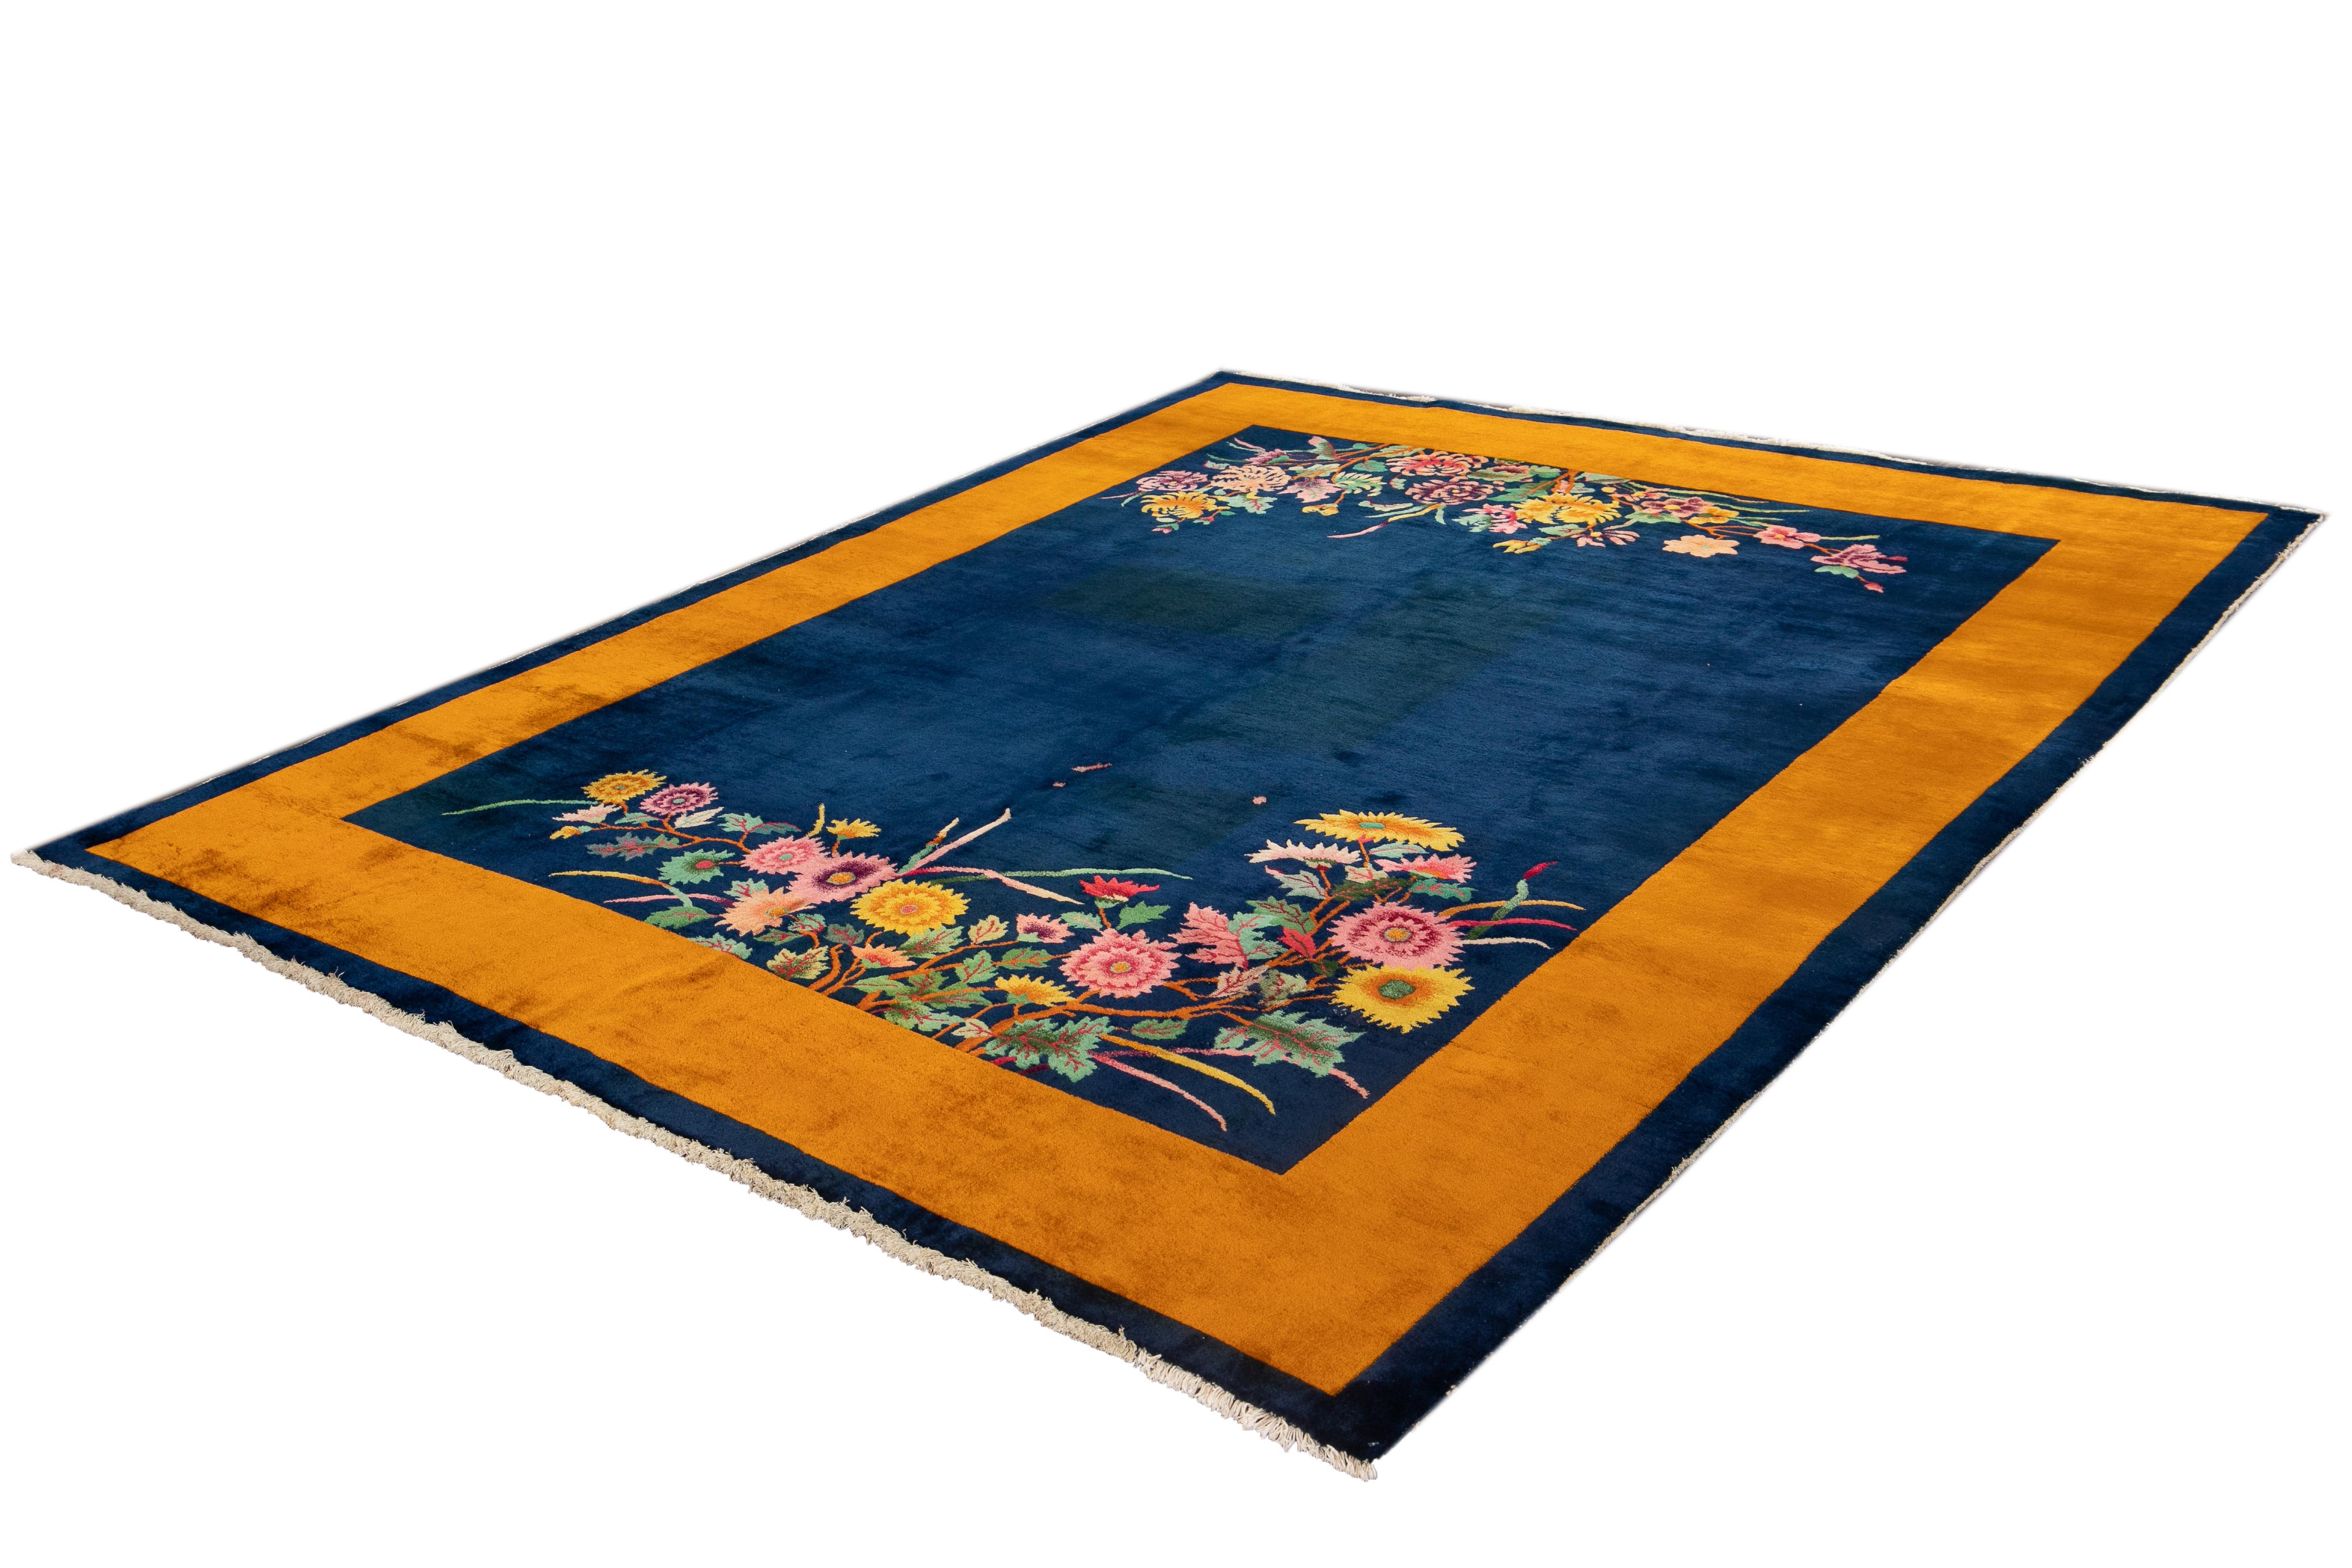 Beautiful vintage Chinese Art Deco rug with a blue field and gold border with multicolored accents and floral designs. 

This rug measures 8' 2